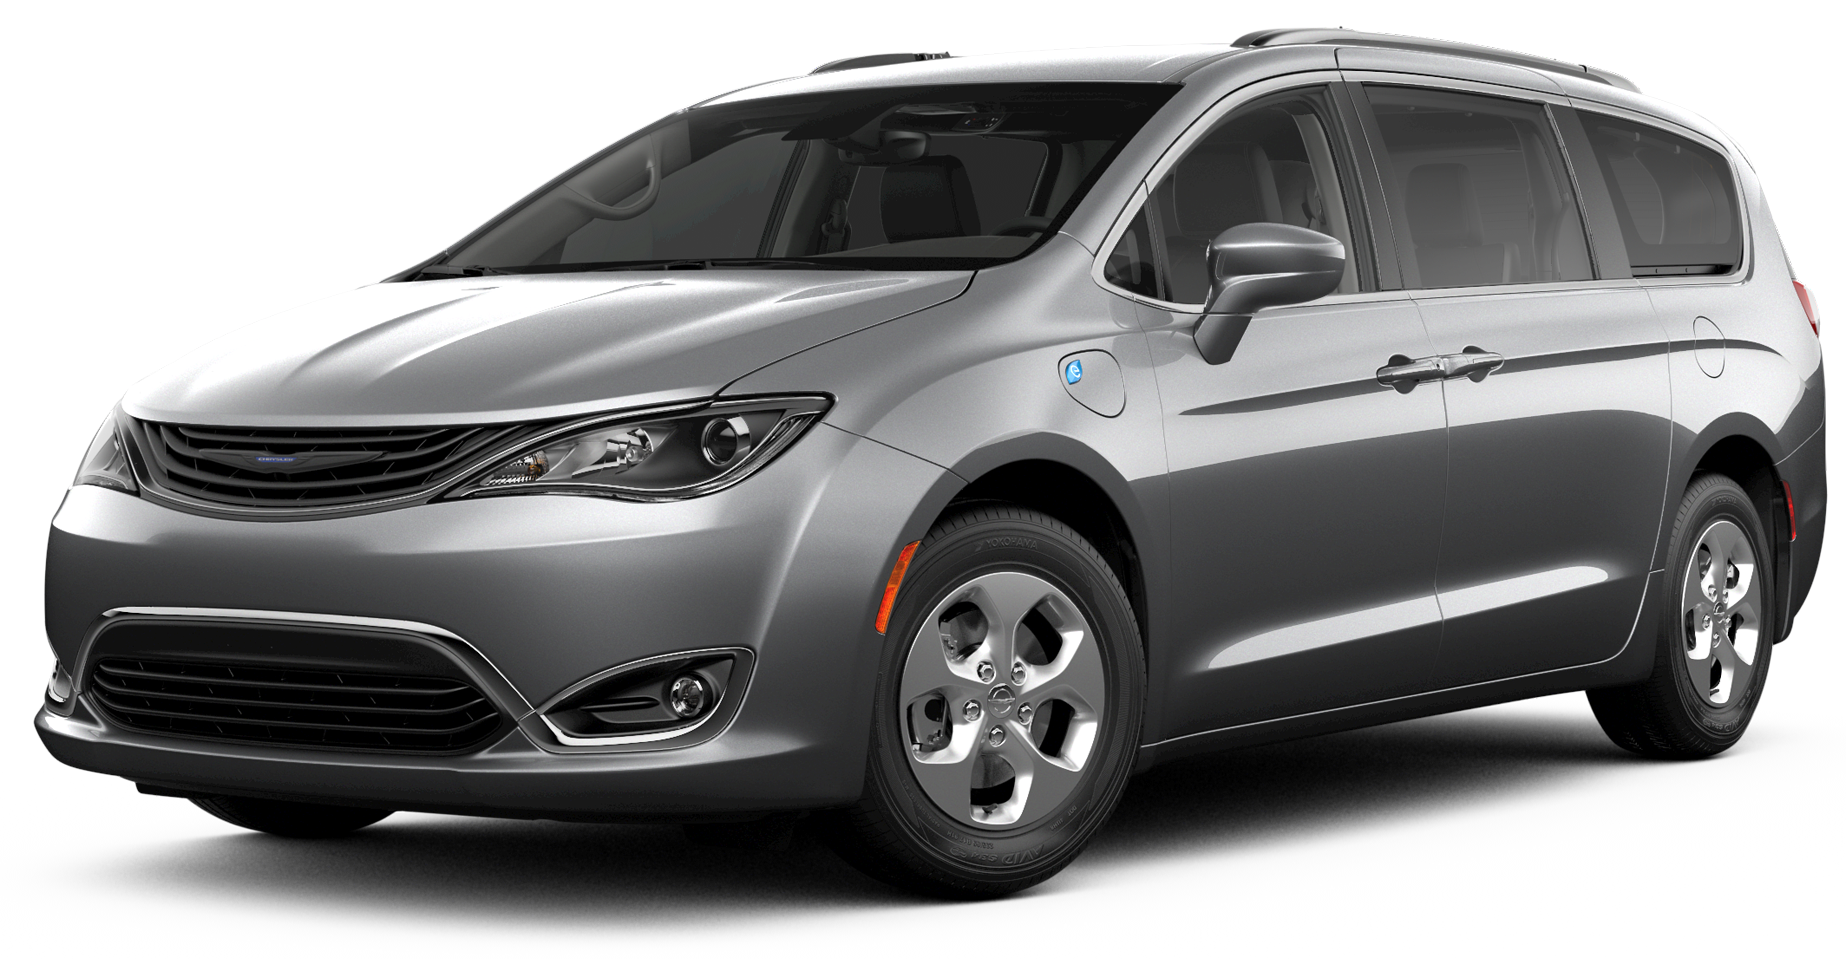 2019 Chrysler Pacifica Hybrid Incentives, Specials & Offers in Putnam CT